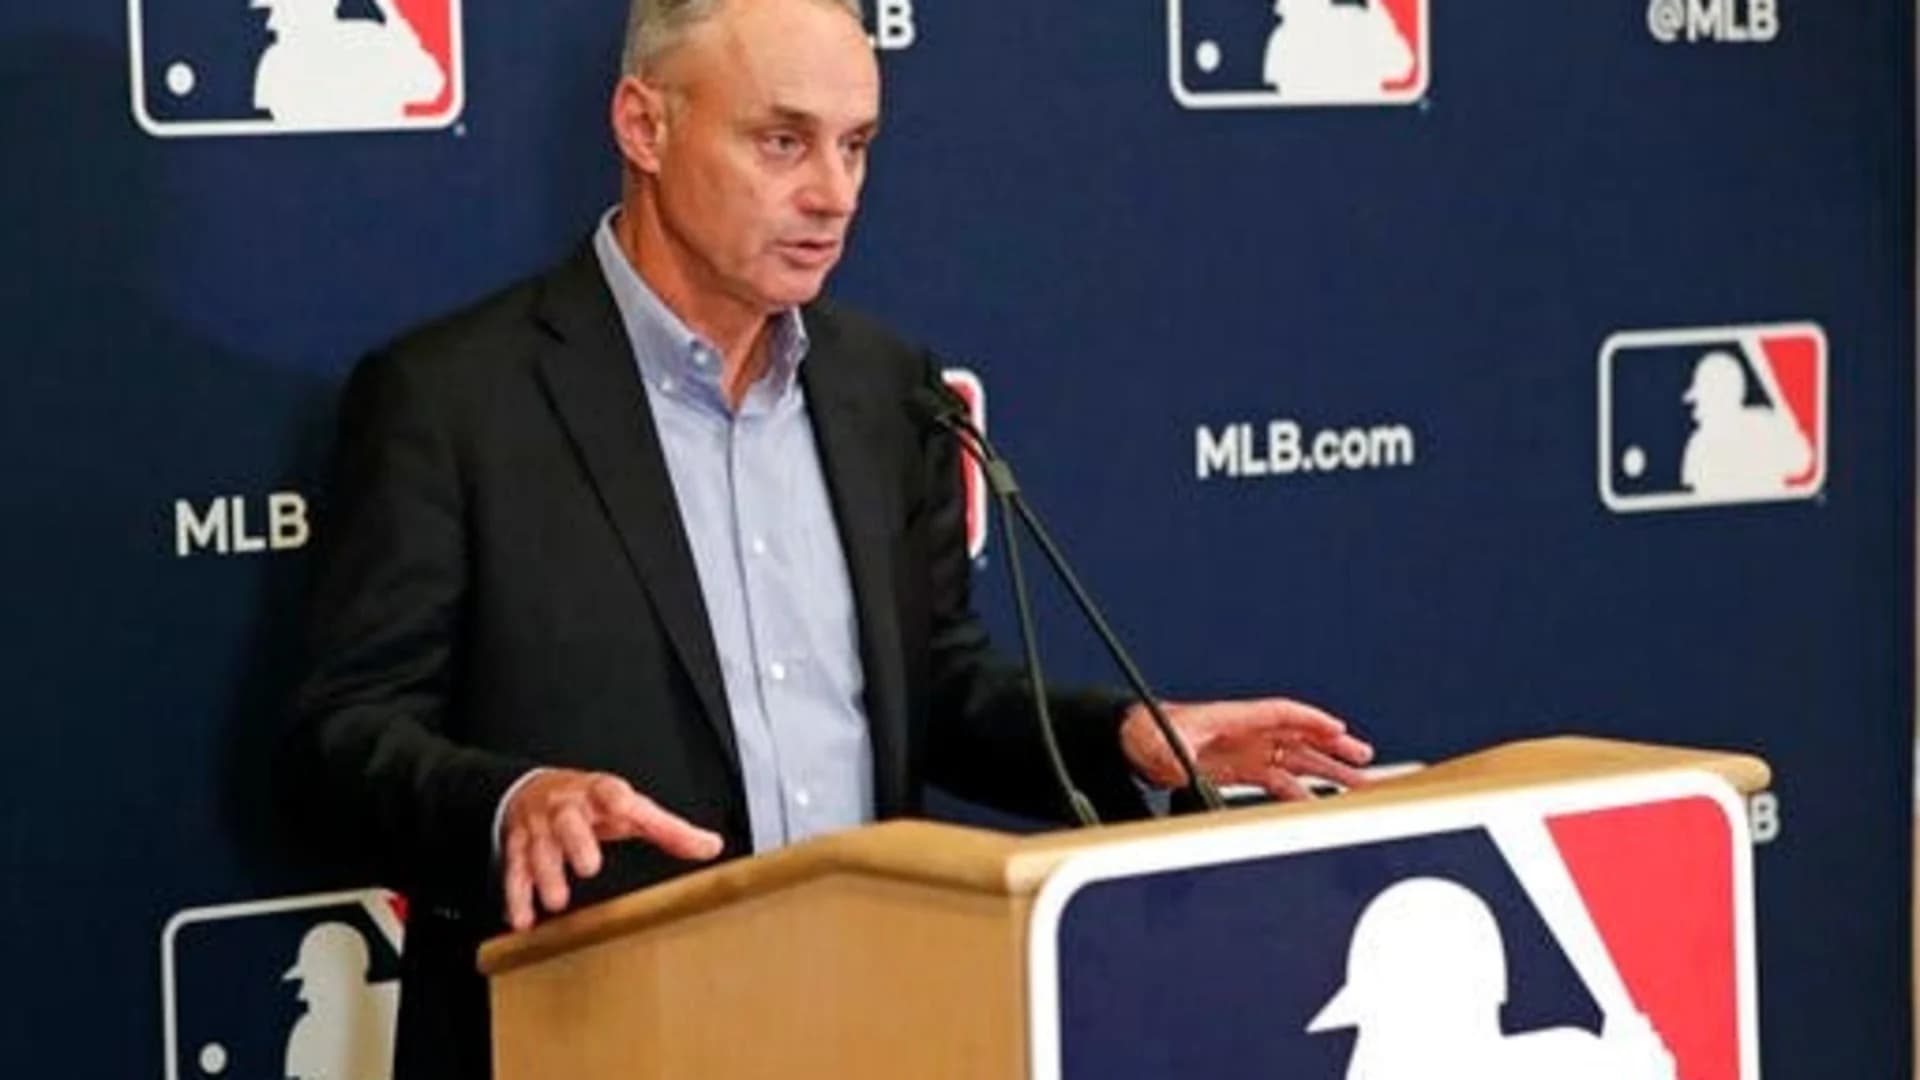 MLB goes ahead with 3-batter minimum, roster changes